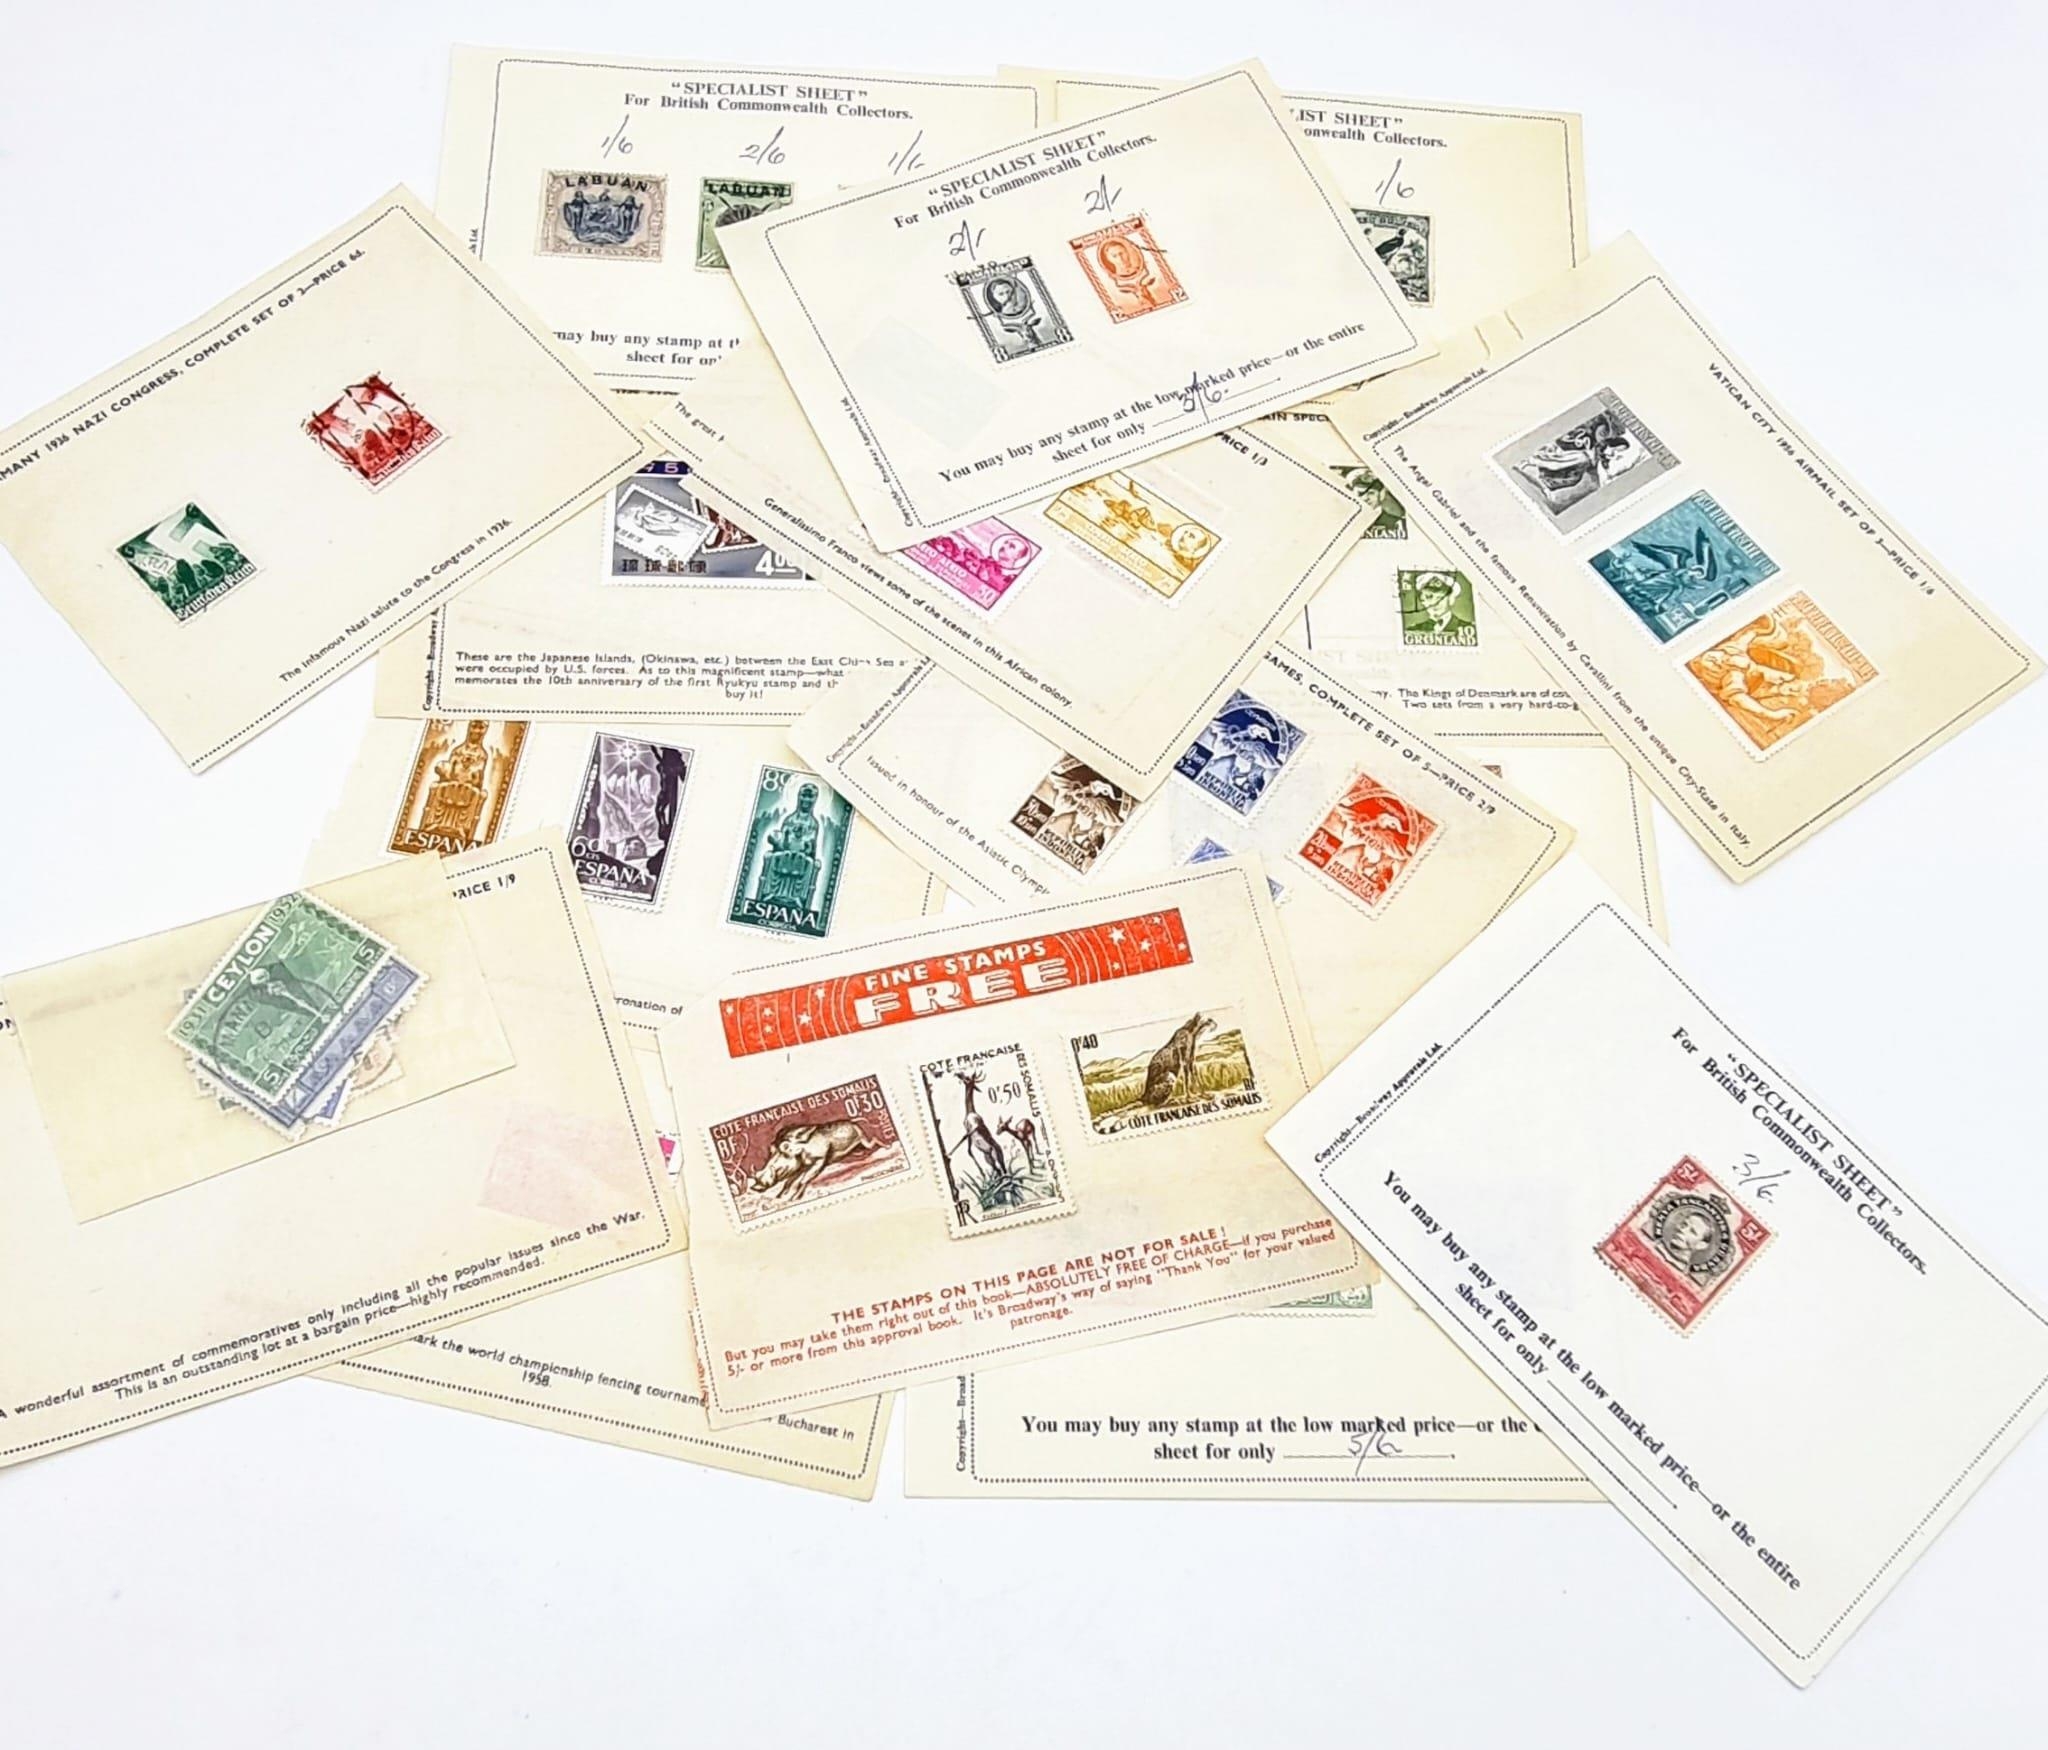 A Parcel of 53 Vintage Specialist Collector Stamps in Excellent Condition Comprising; 2 Nazi Germany